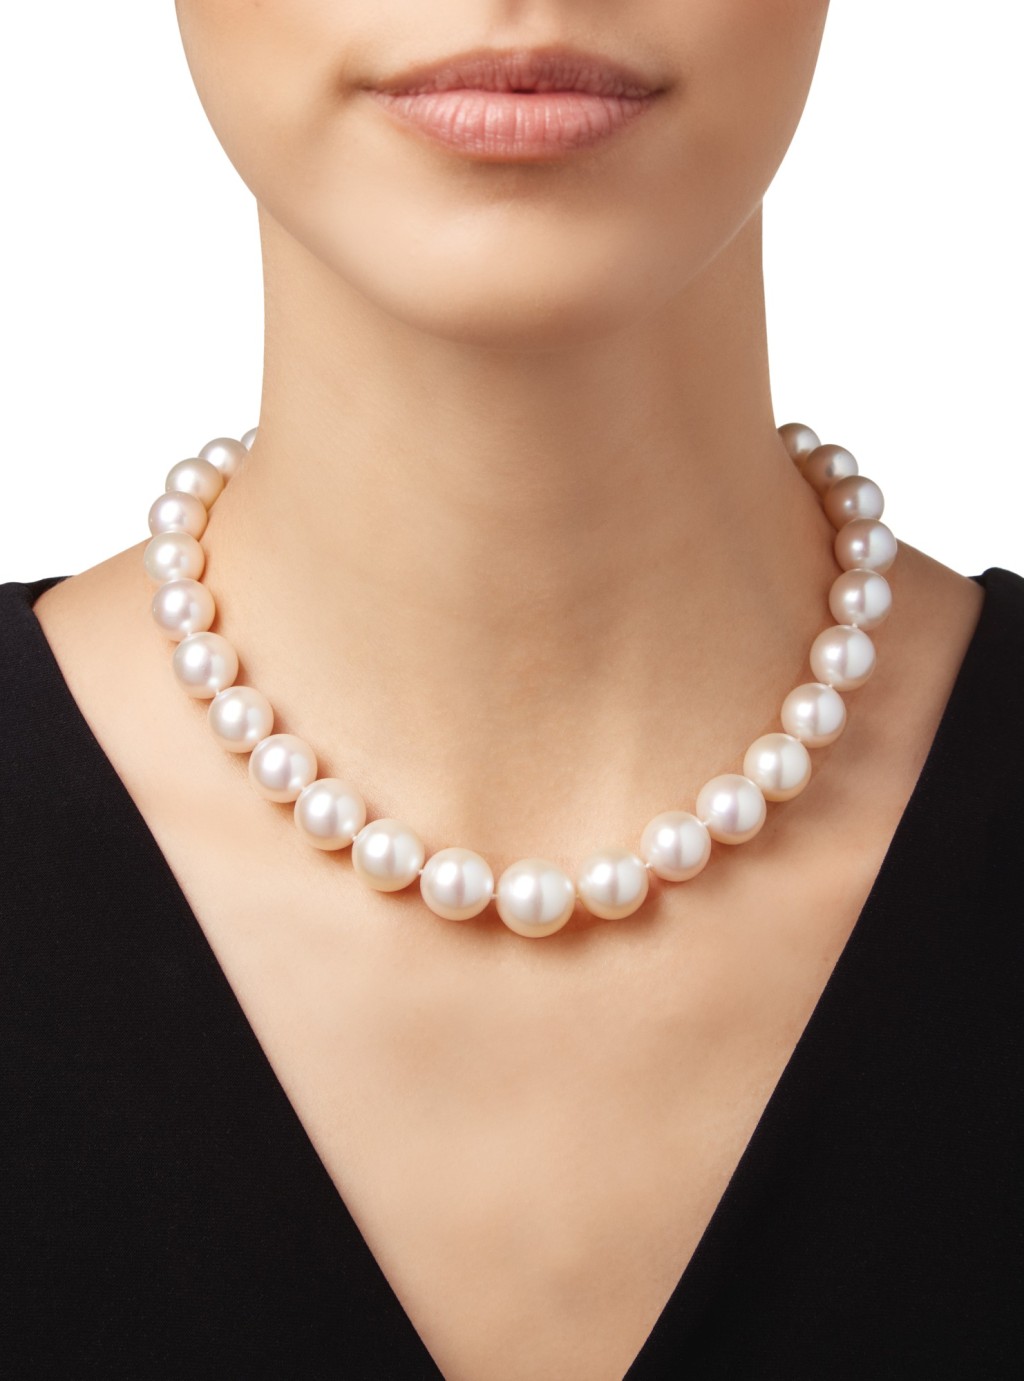 Timeless Elegance: The Allure of Round Pearls